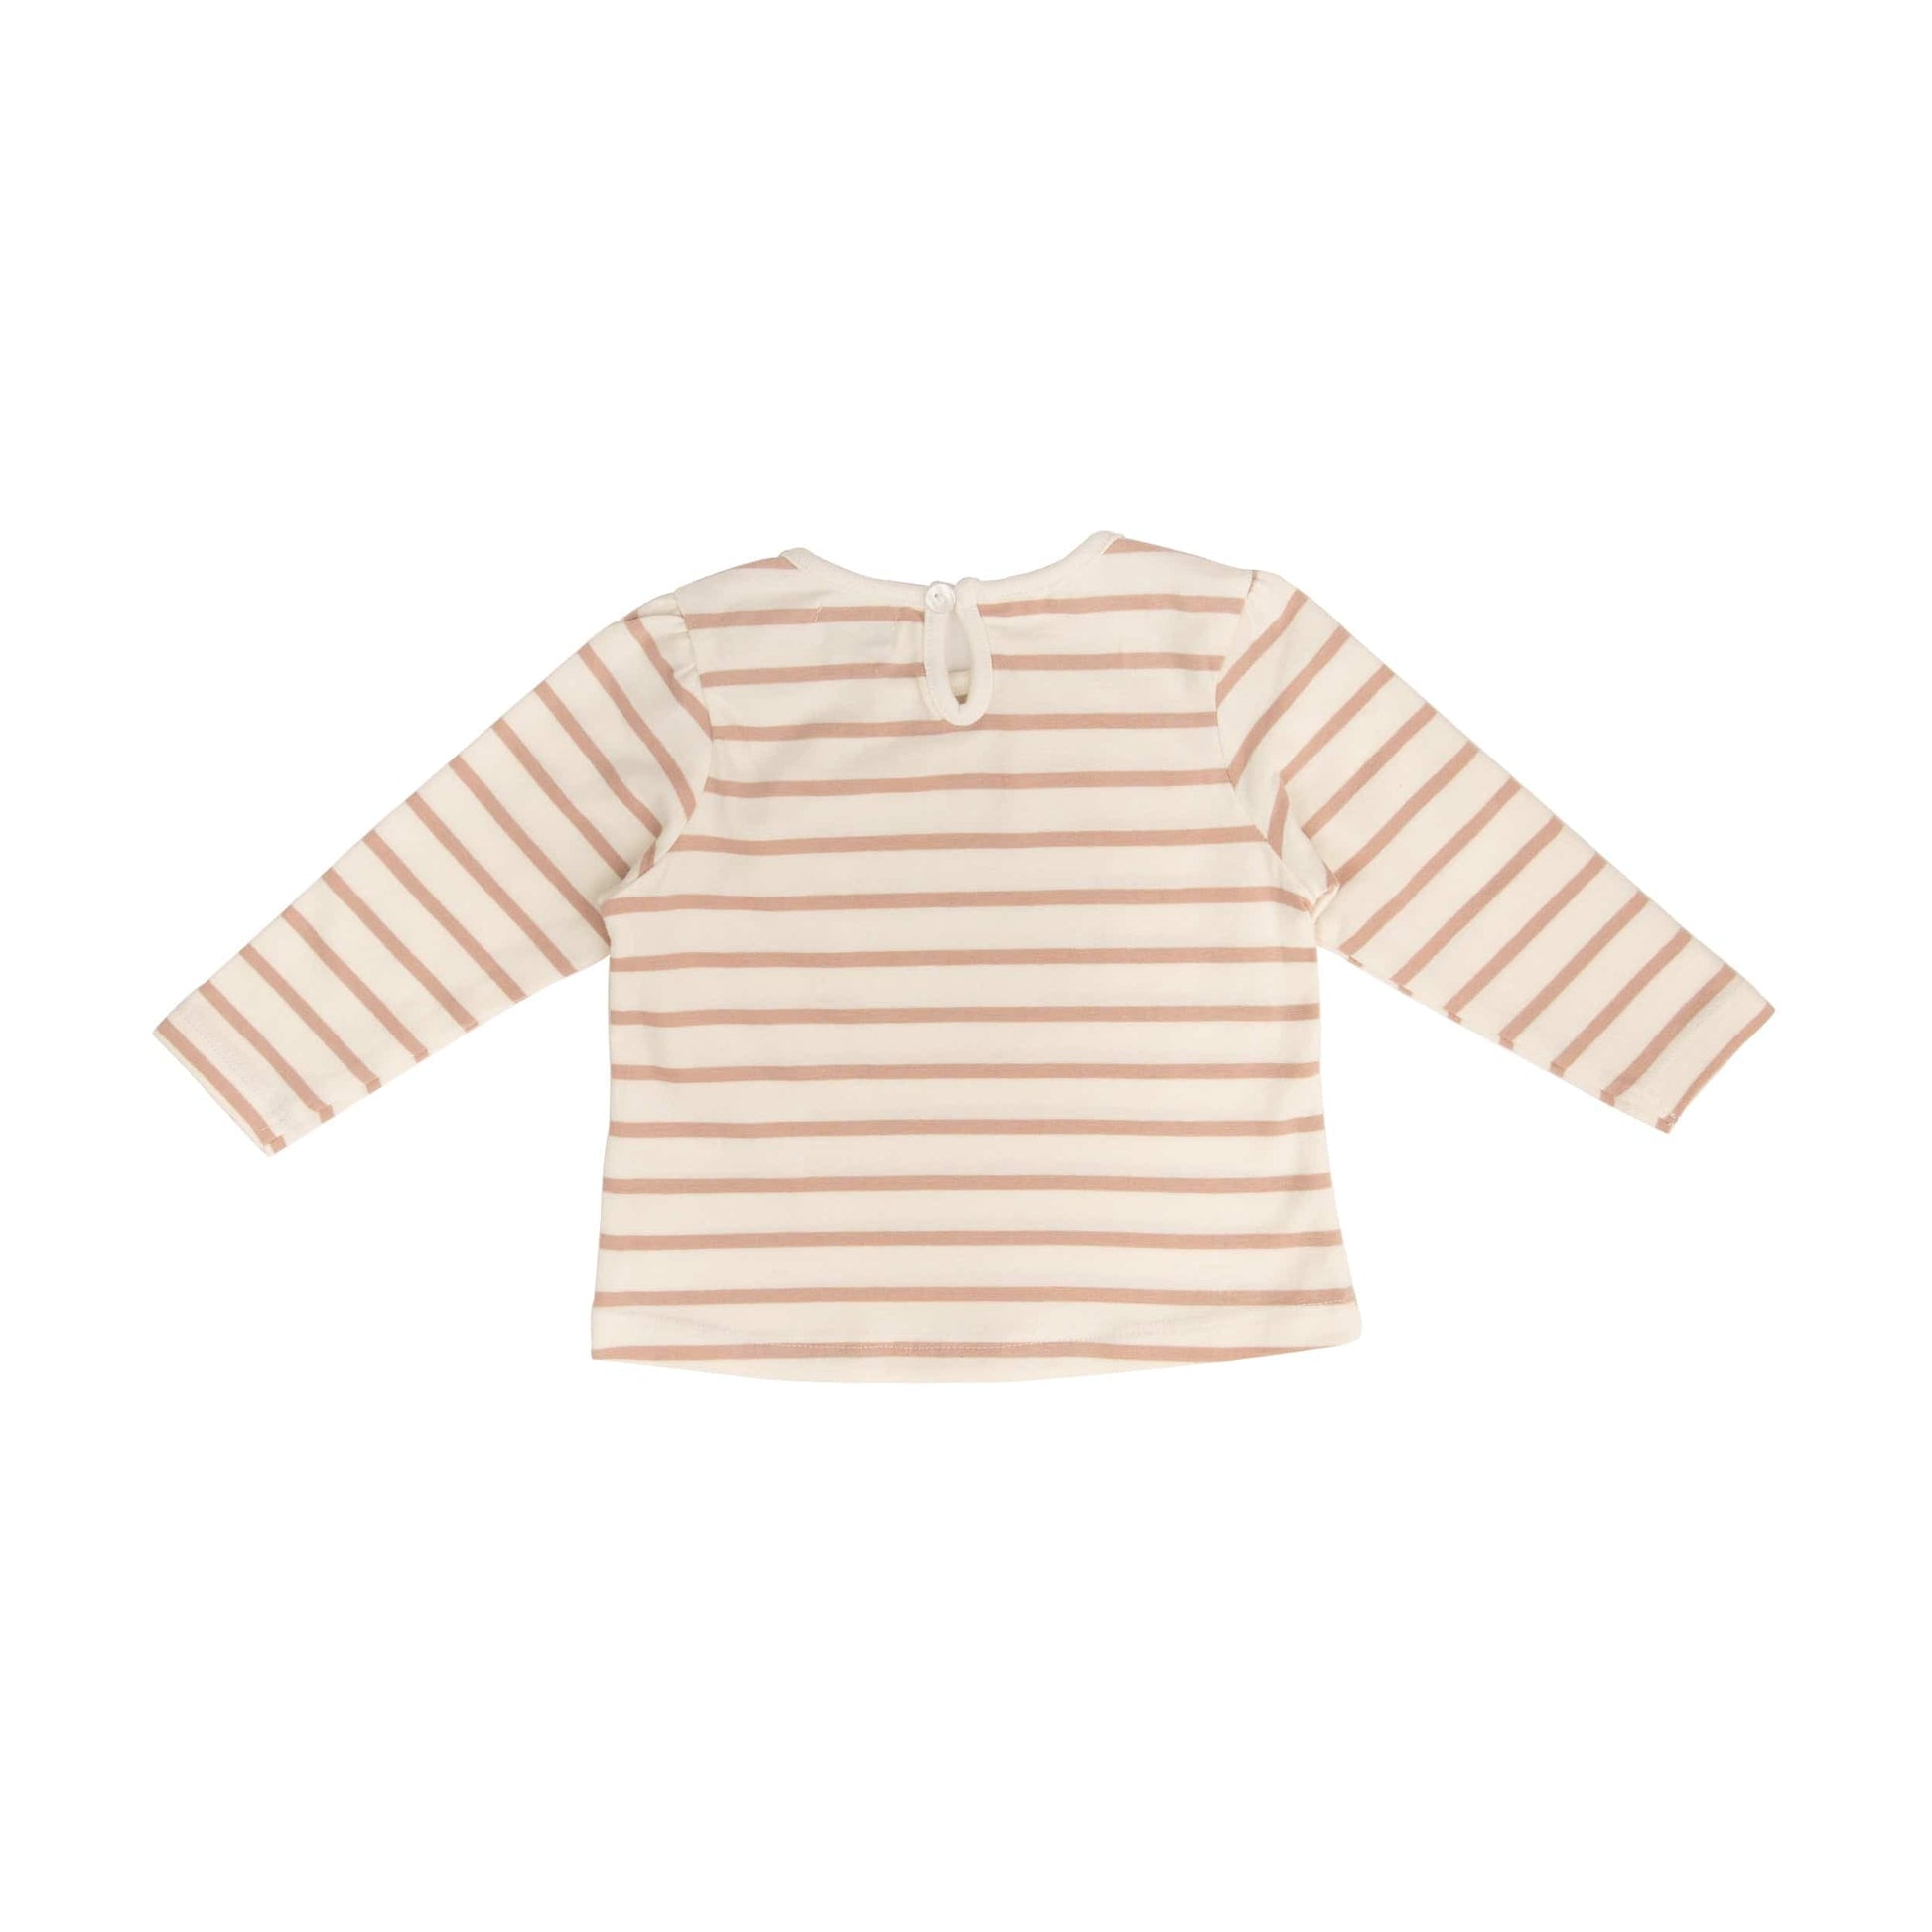 Noukie's Tops Cream and pink striped long sleeve